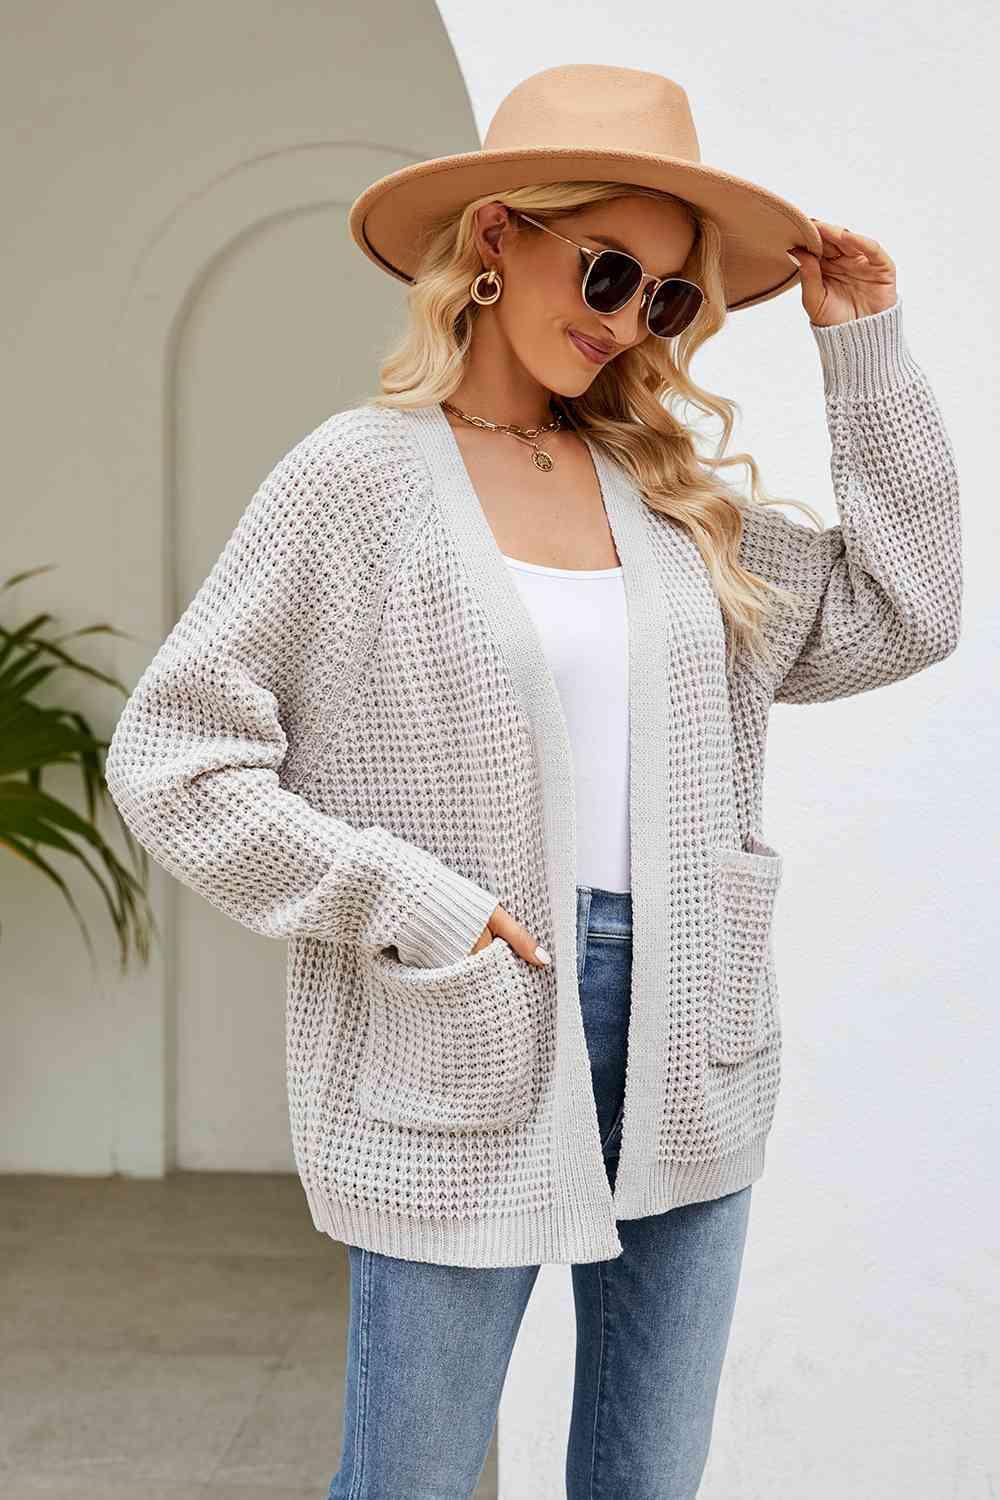 Open Front Long Sleeve Cardigan with Pockets - Bona Fide Fashion